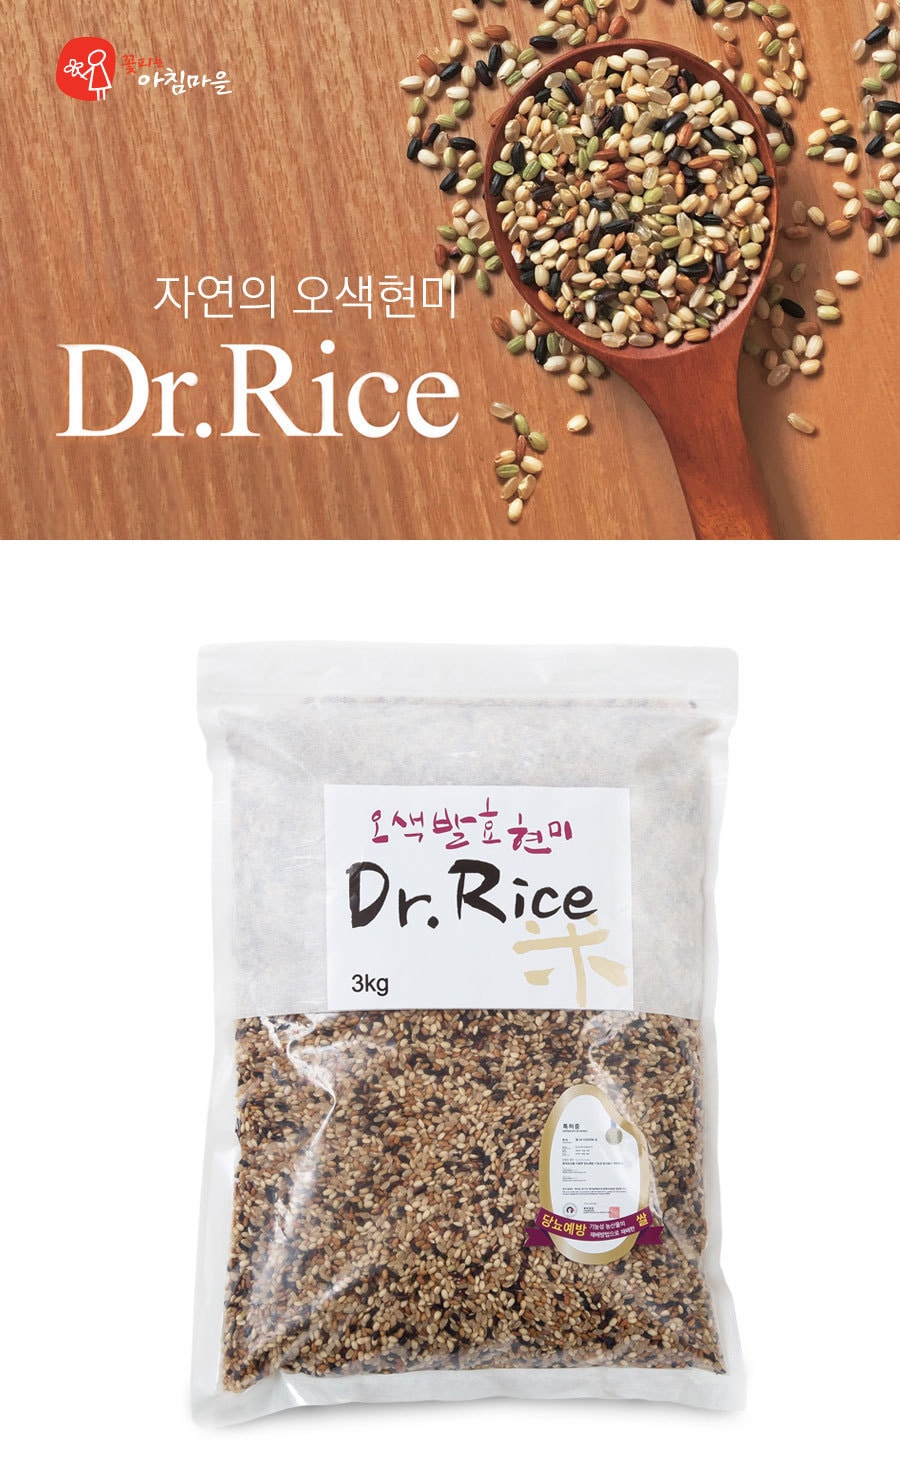 DR. RICE Organic Fermented Colorful Brown Rice  3kg